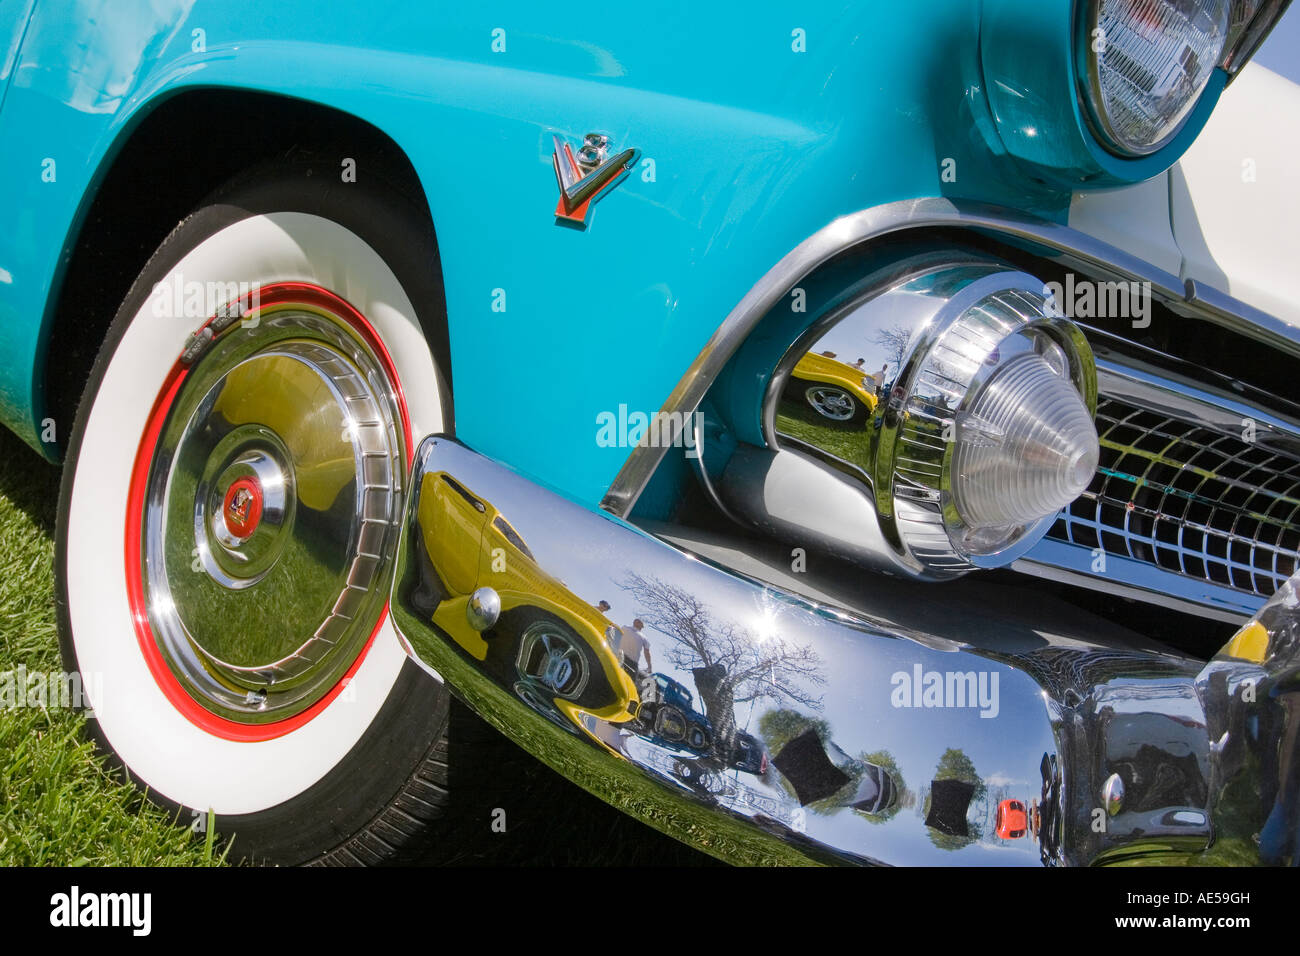 Turquoise 1955 Ford Fairlane convertible classic car with front headlights grill and wheel with whitewall tire with red trim Stock Photo